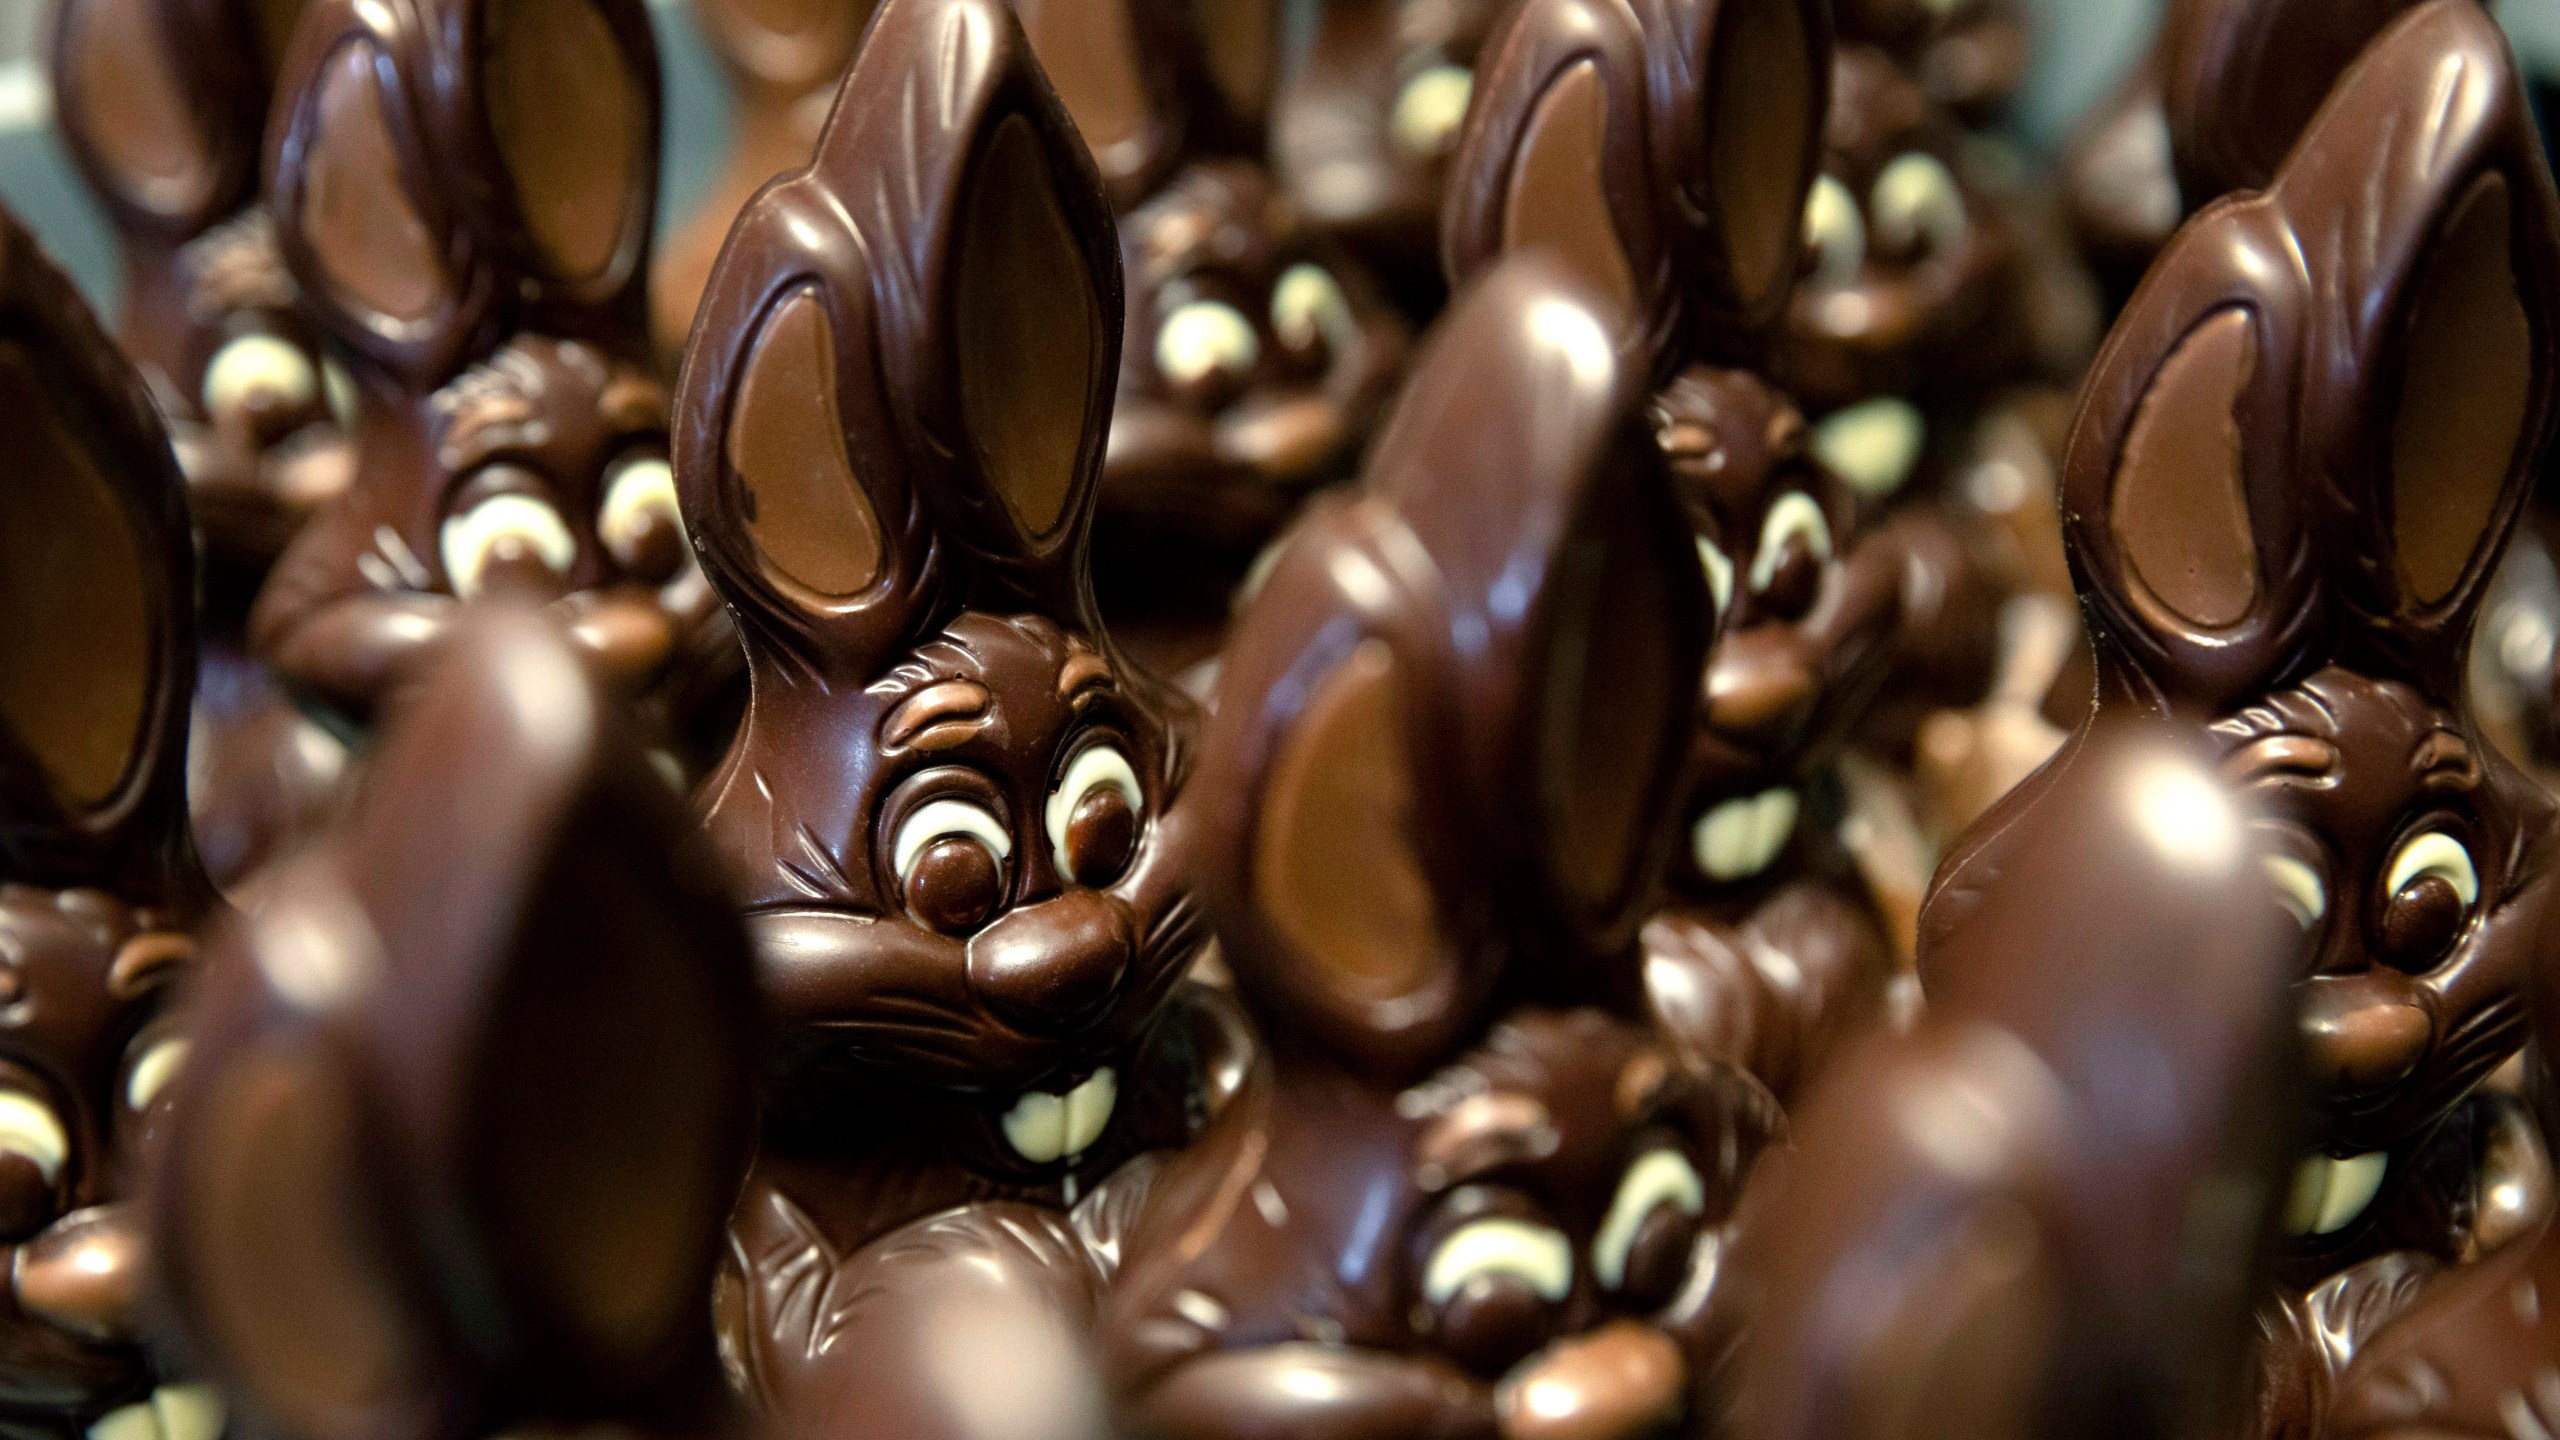 FILE - Chocolate rabbits wait to be decorated at the Cocoatree chocolate shop, April 8, 2020, in Lonzee, Belgium. Sweet Easter baskets will likely come at a bitter cost this year for consumers as the price of cocoa climbs to record highs. (AP Photo/Virginia Mayo, File)